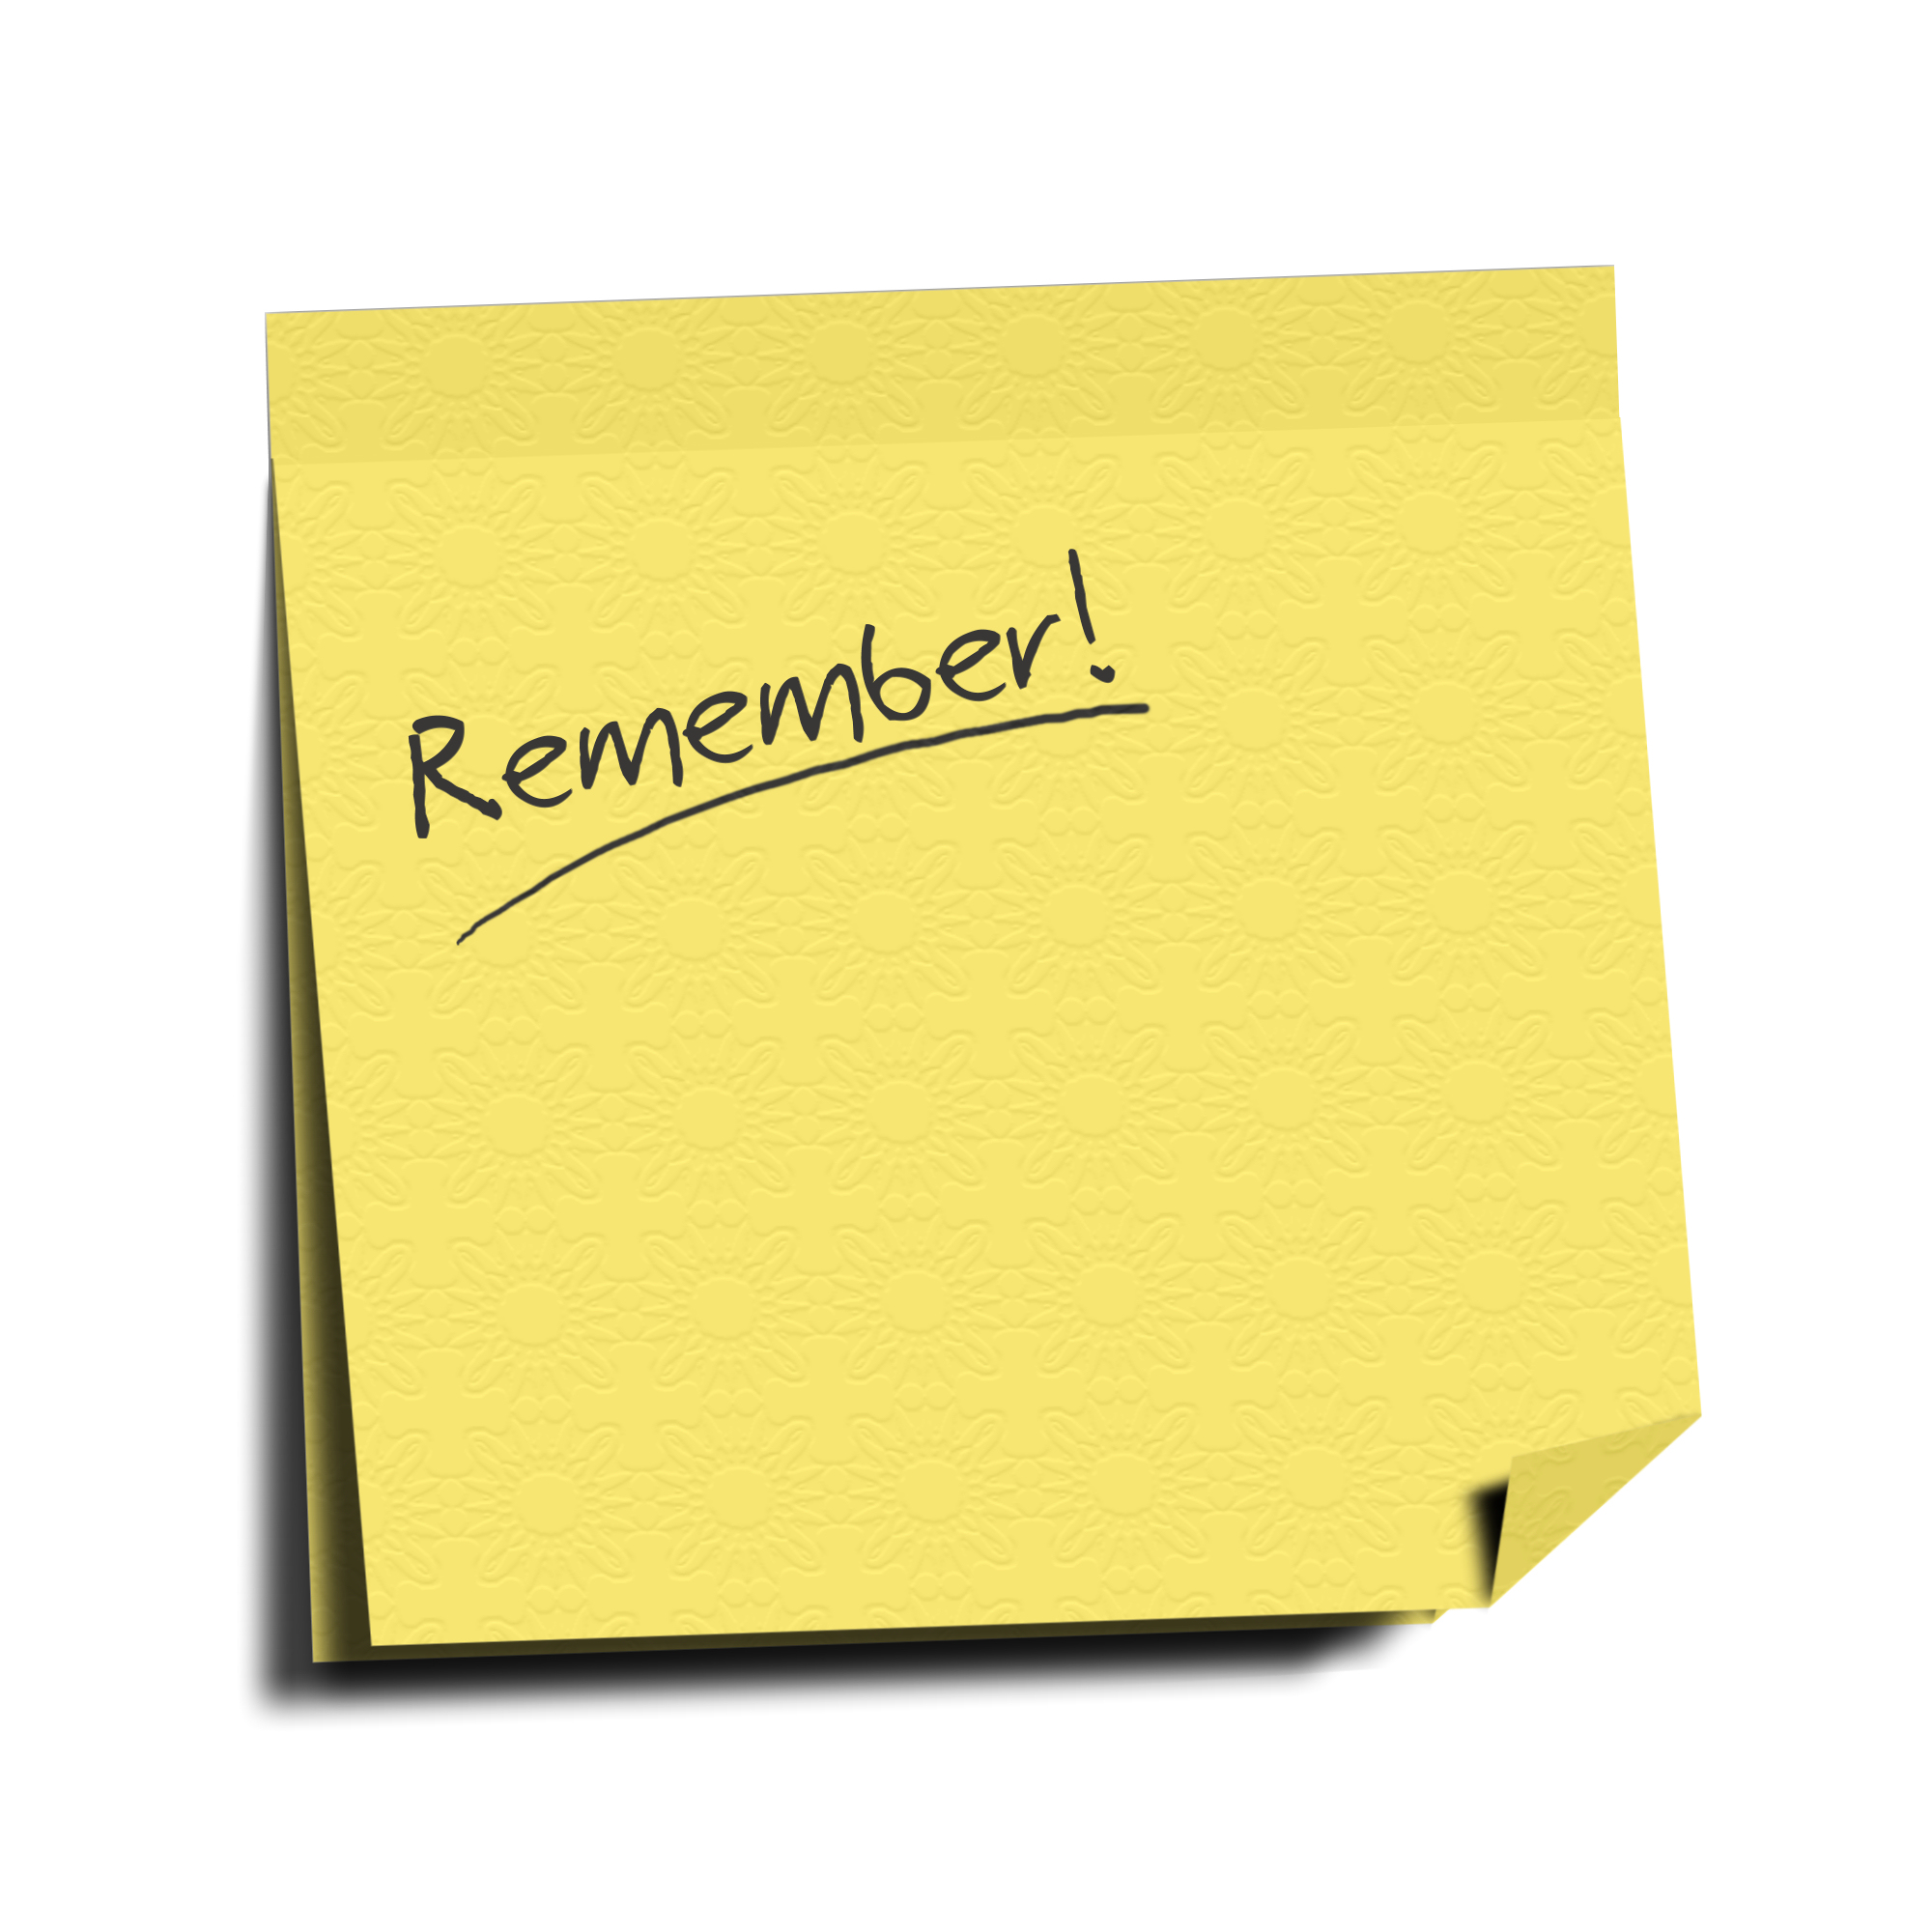 Remember post it notes clipart the cliparts jpg